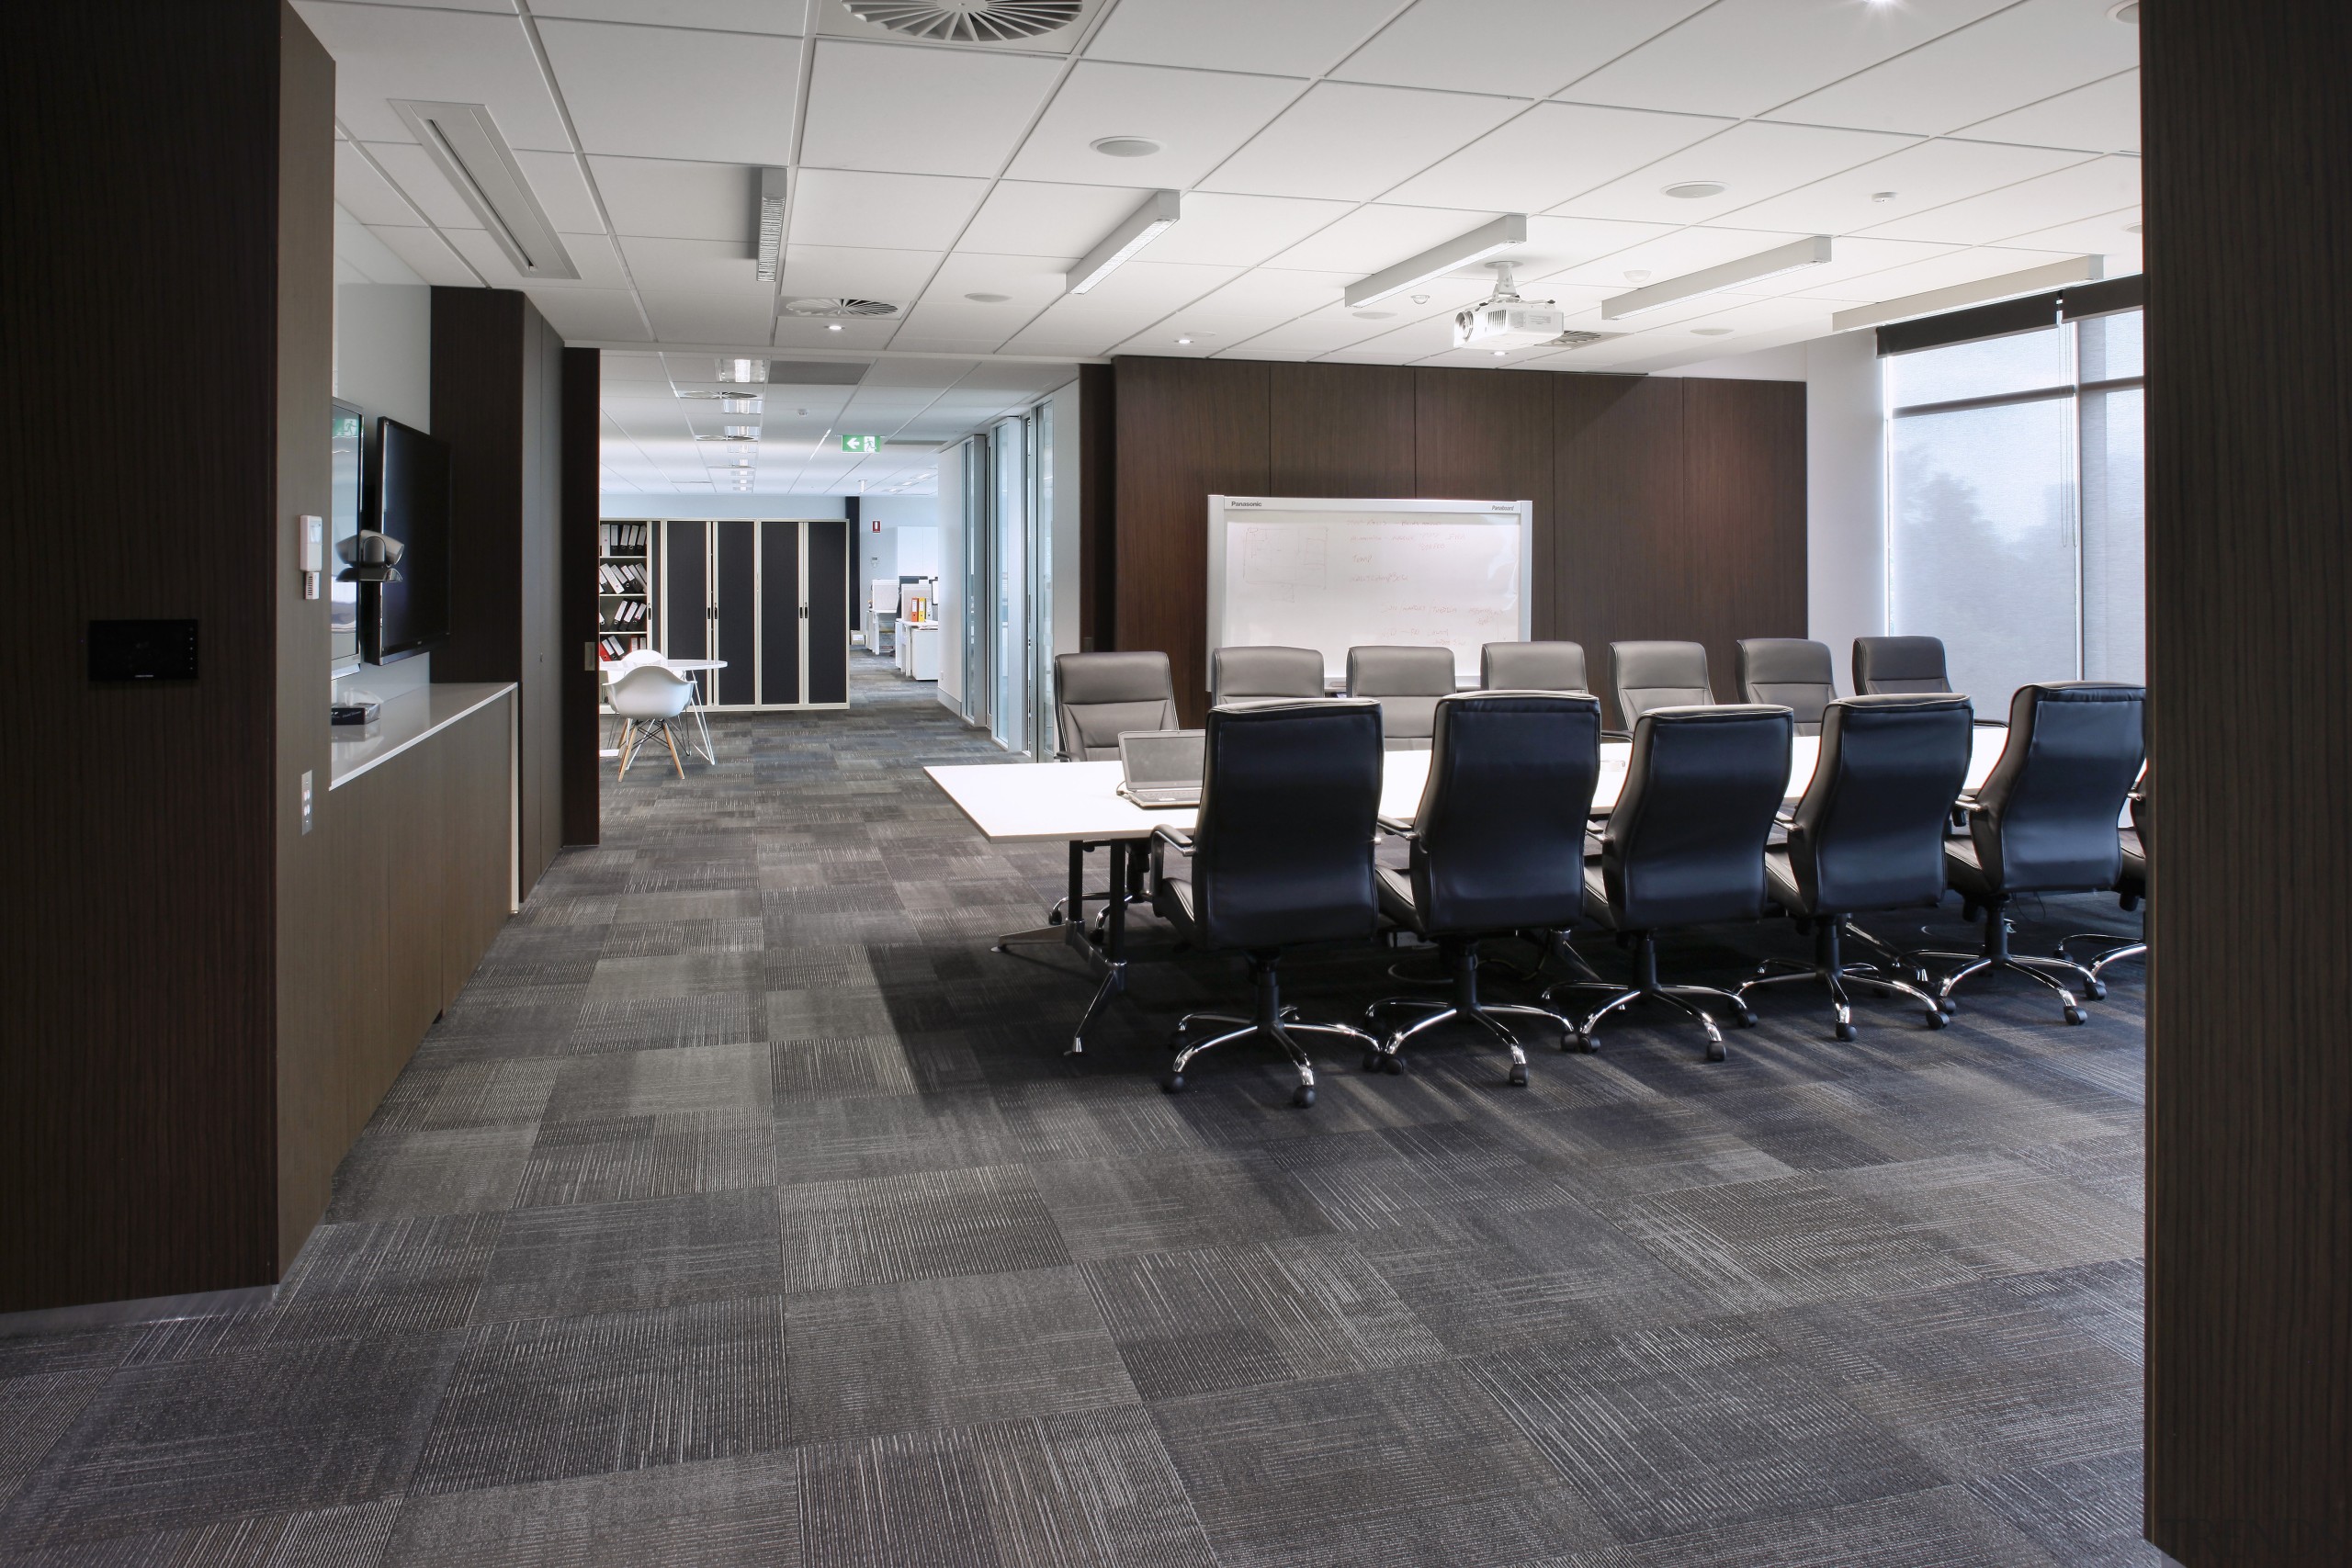 This boutique office development on a brownfields site conference hall, floor, flooring, interior design, lobby, office, tile, wood flooring, gray, black